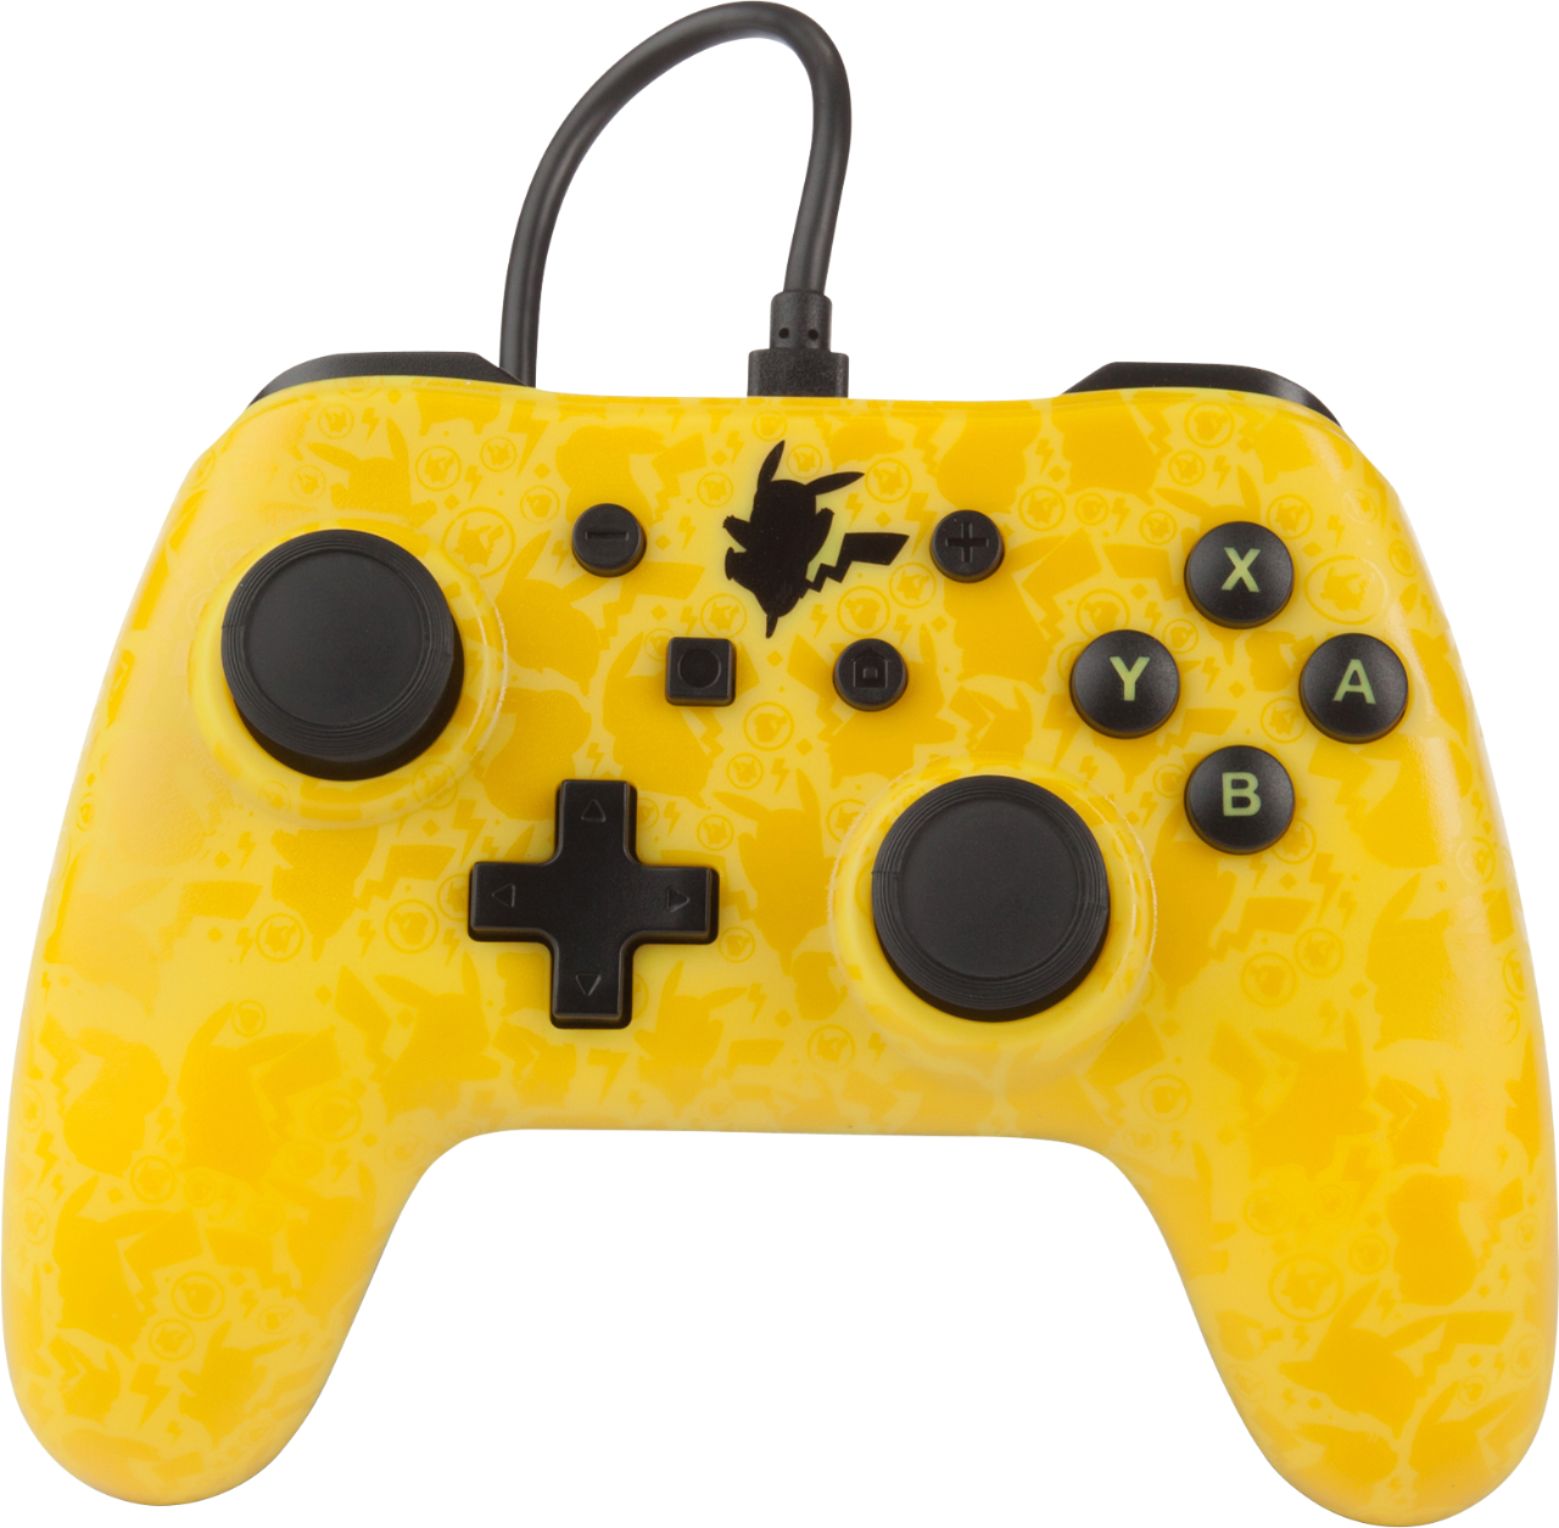 can i use a wired controller on switch lite